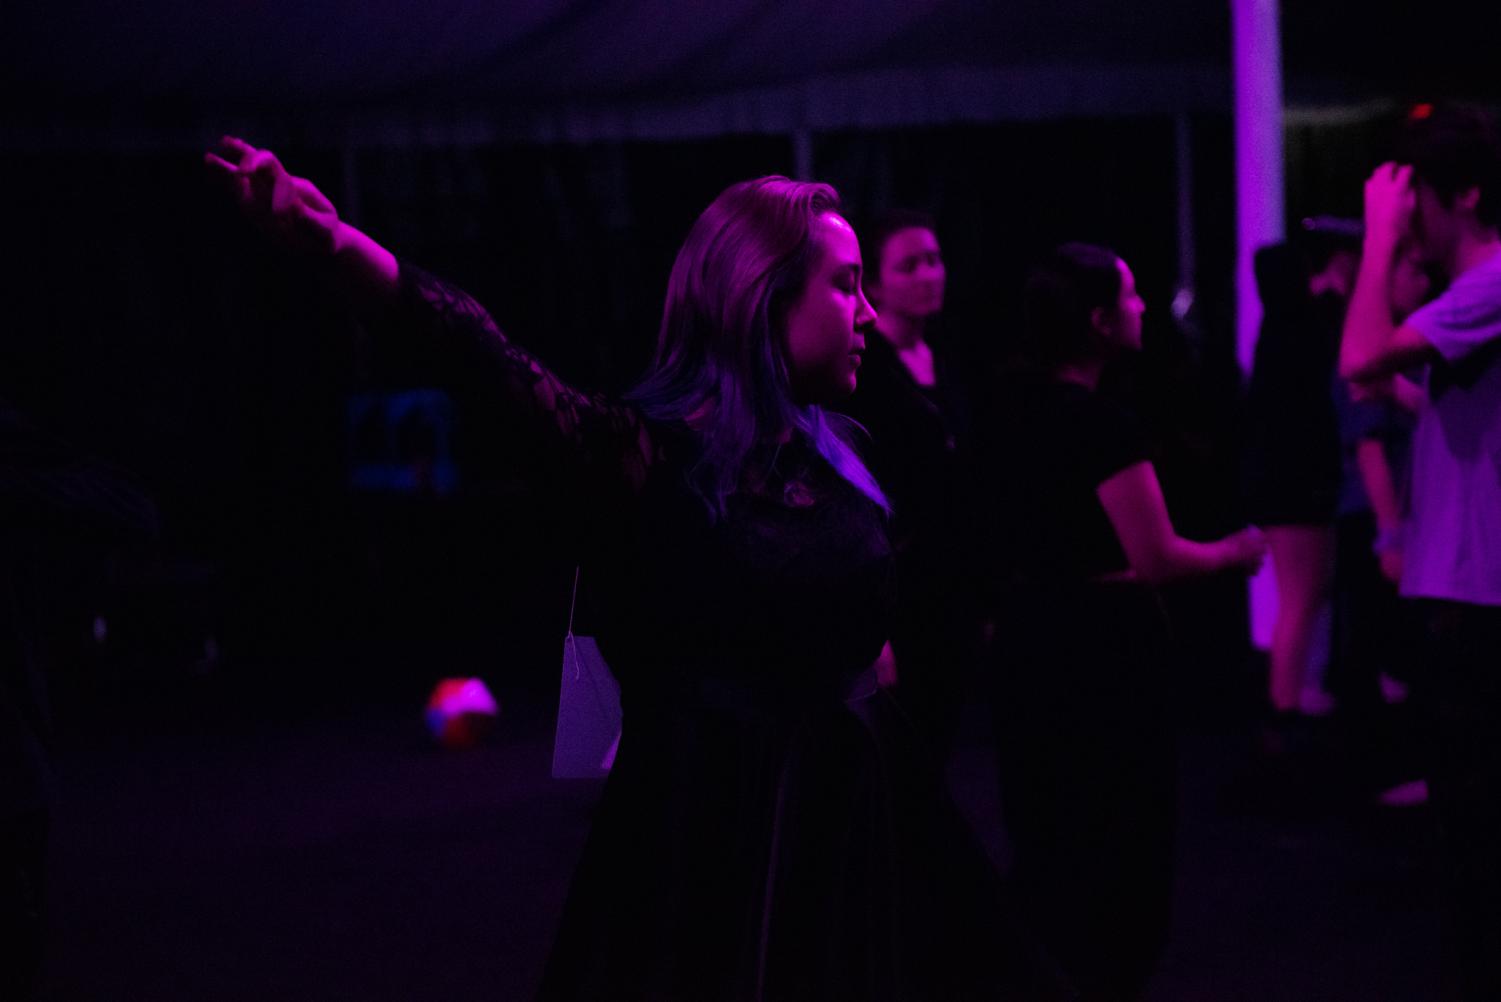 A person dances under purple lights, their arm outstretched. 